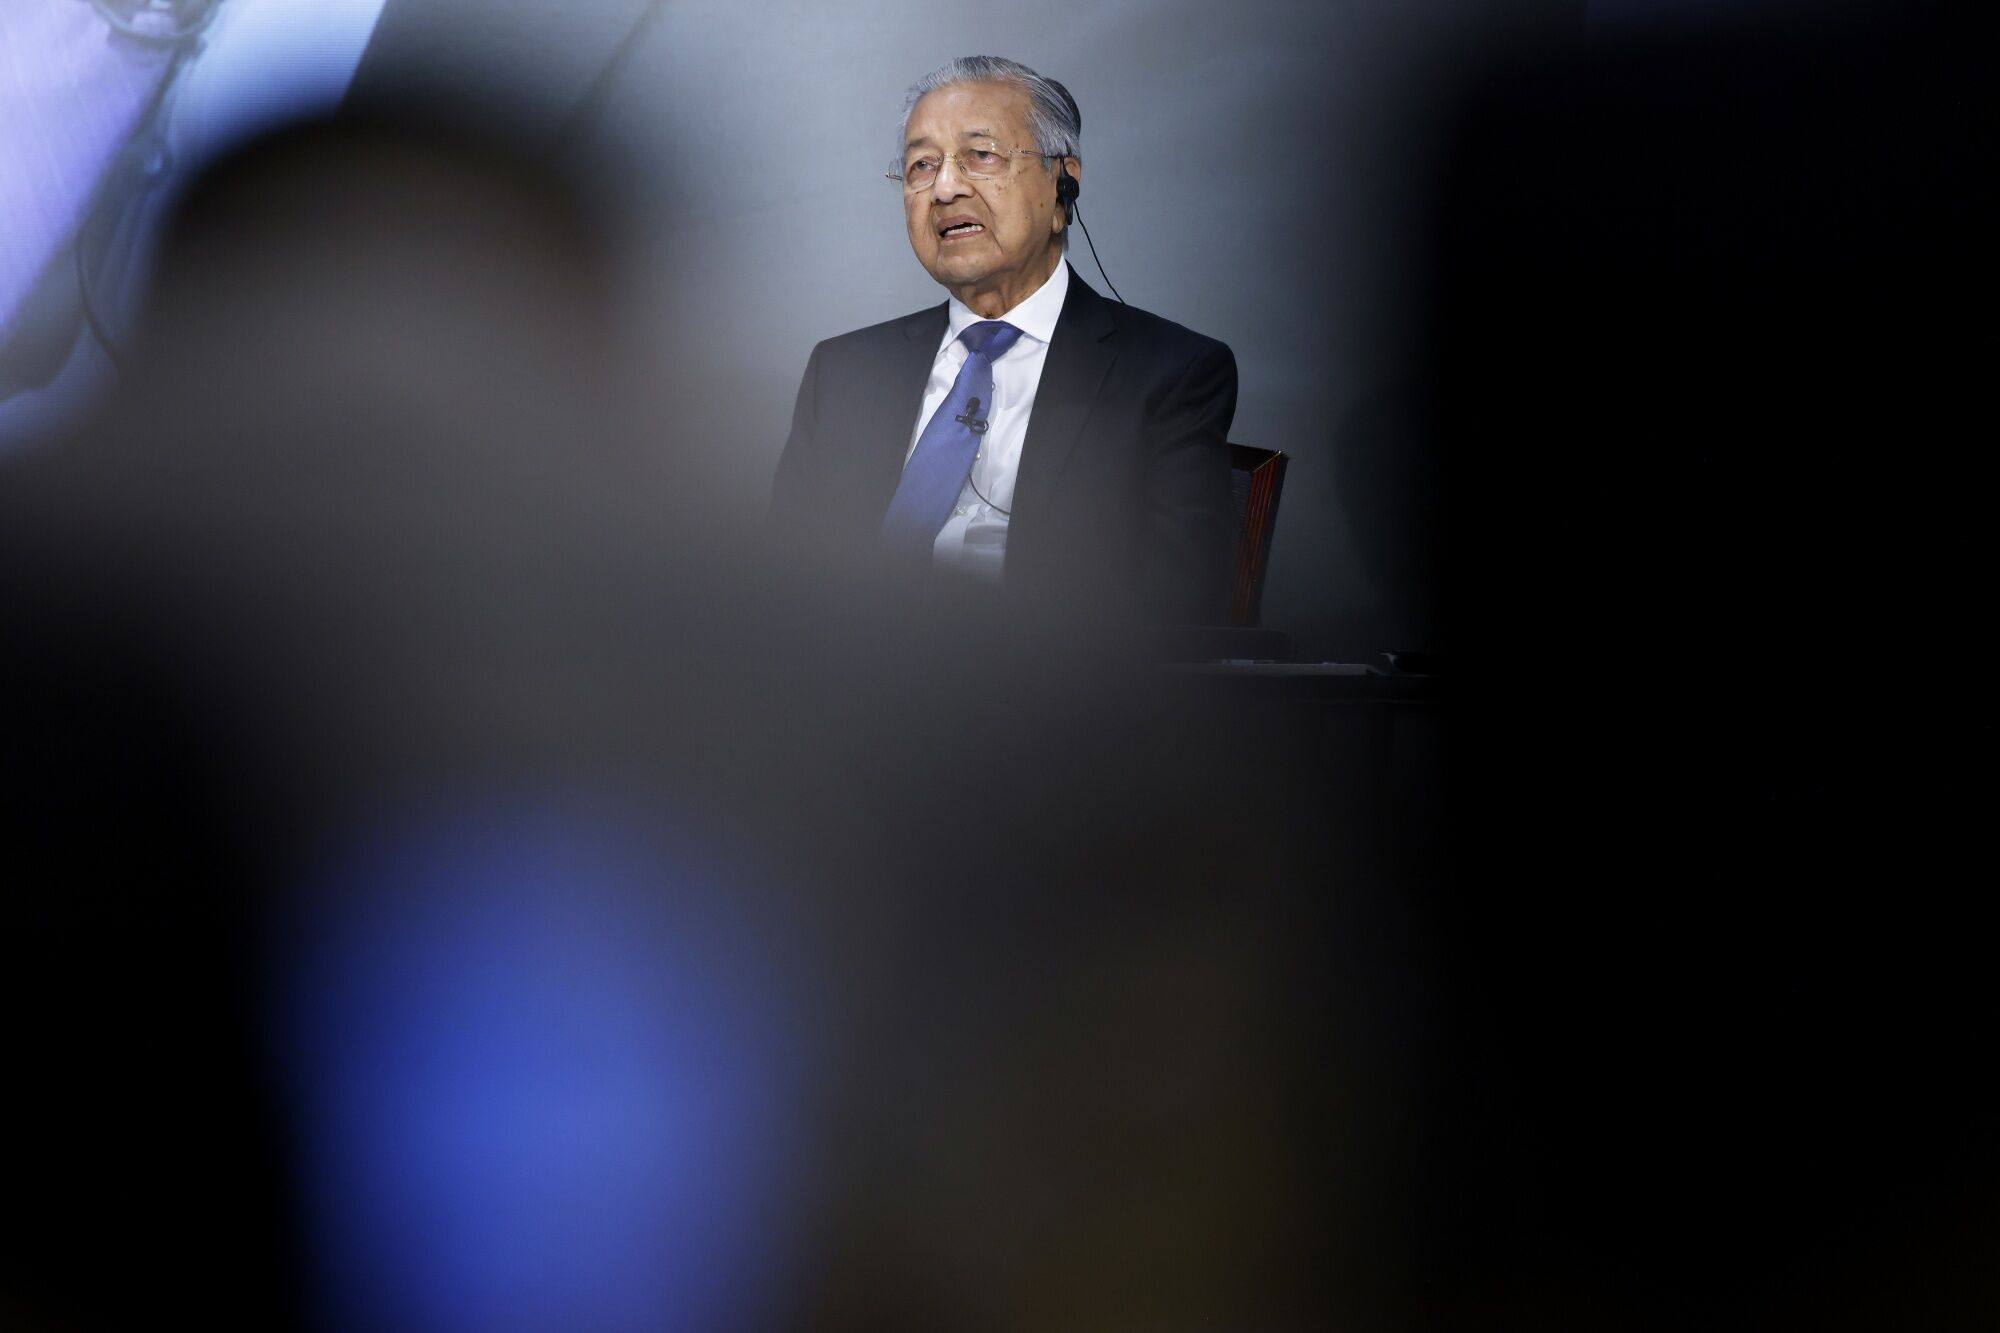 Malaysia’s former prime minister Mahathir speaks during an event in Tokyo, Japan on May 26. Mahathir was questioned by police for allegedly insulting royalty. Photo: Bloomberg